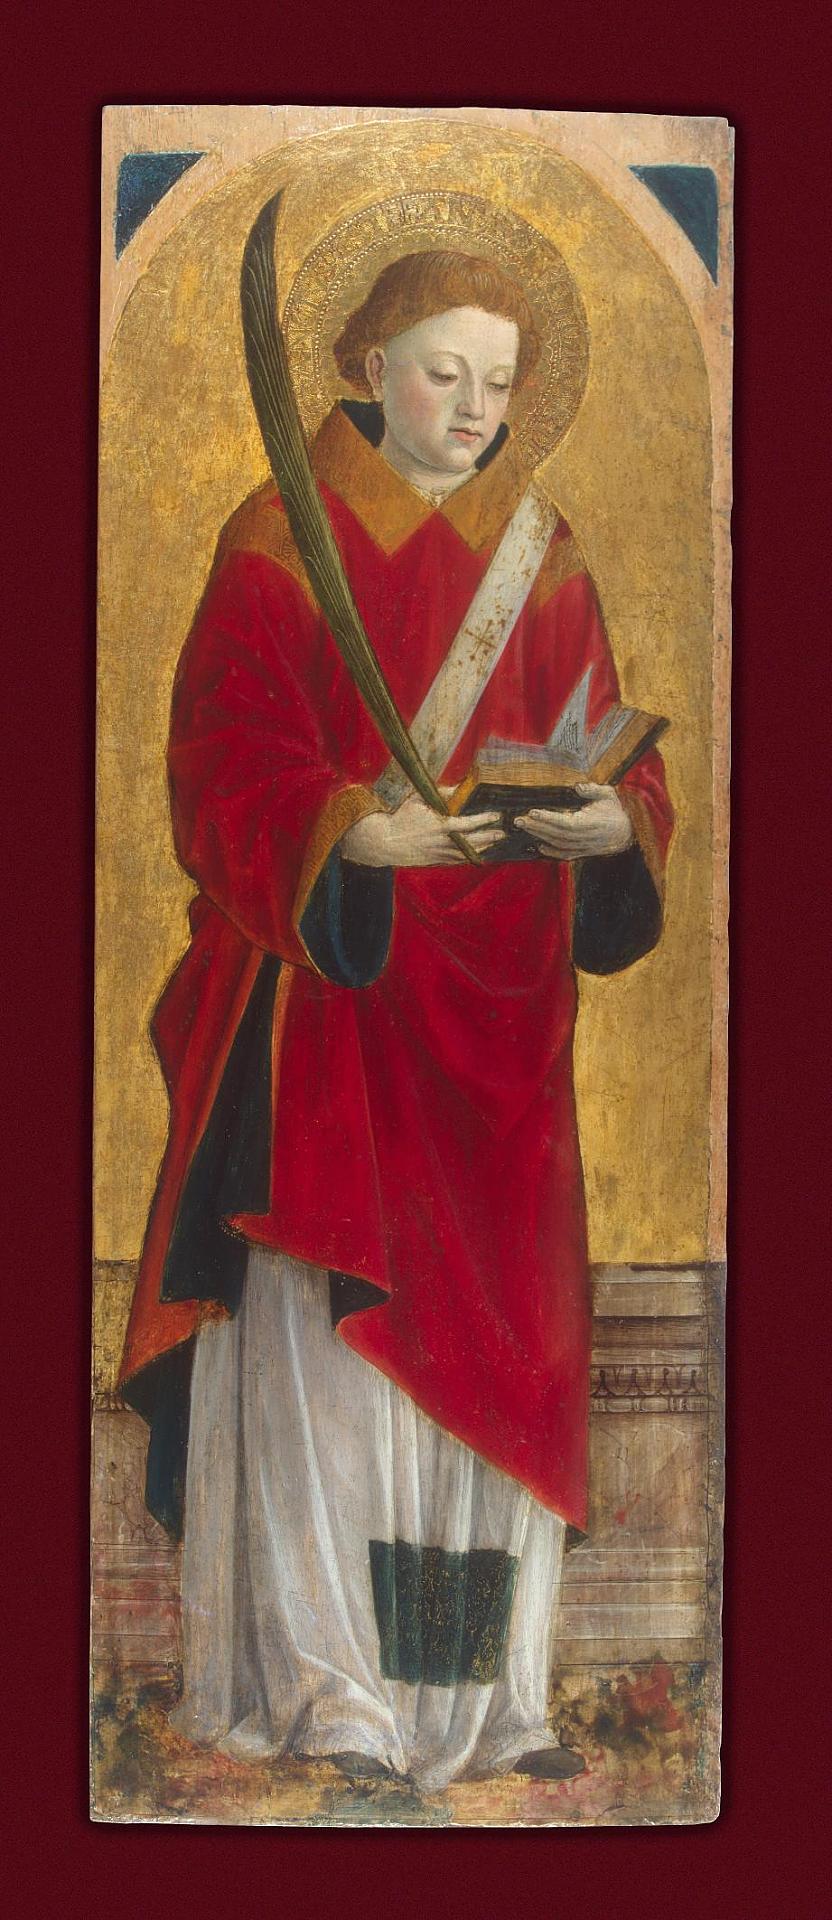 St Stephen the Martyr by Vincenzo Foppa